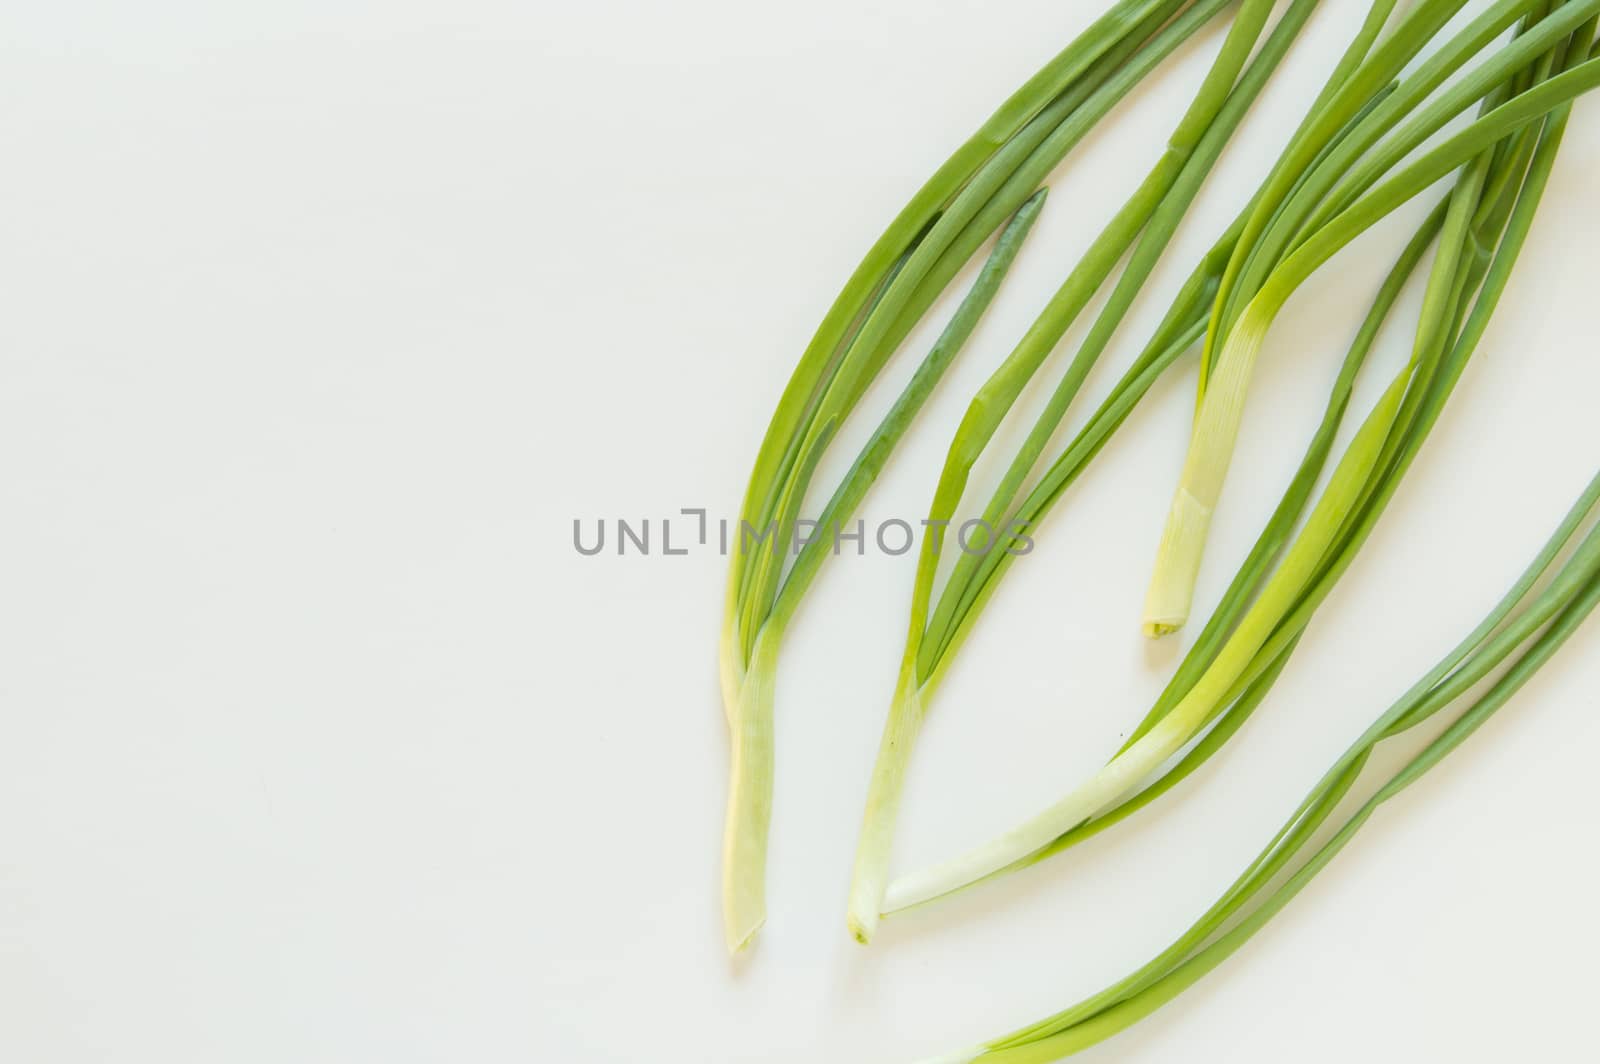 Fresh green onions on white isolated background. A place for your text, a copy of the space, the concept of vegetarian and organic food.